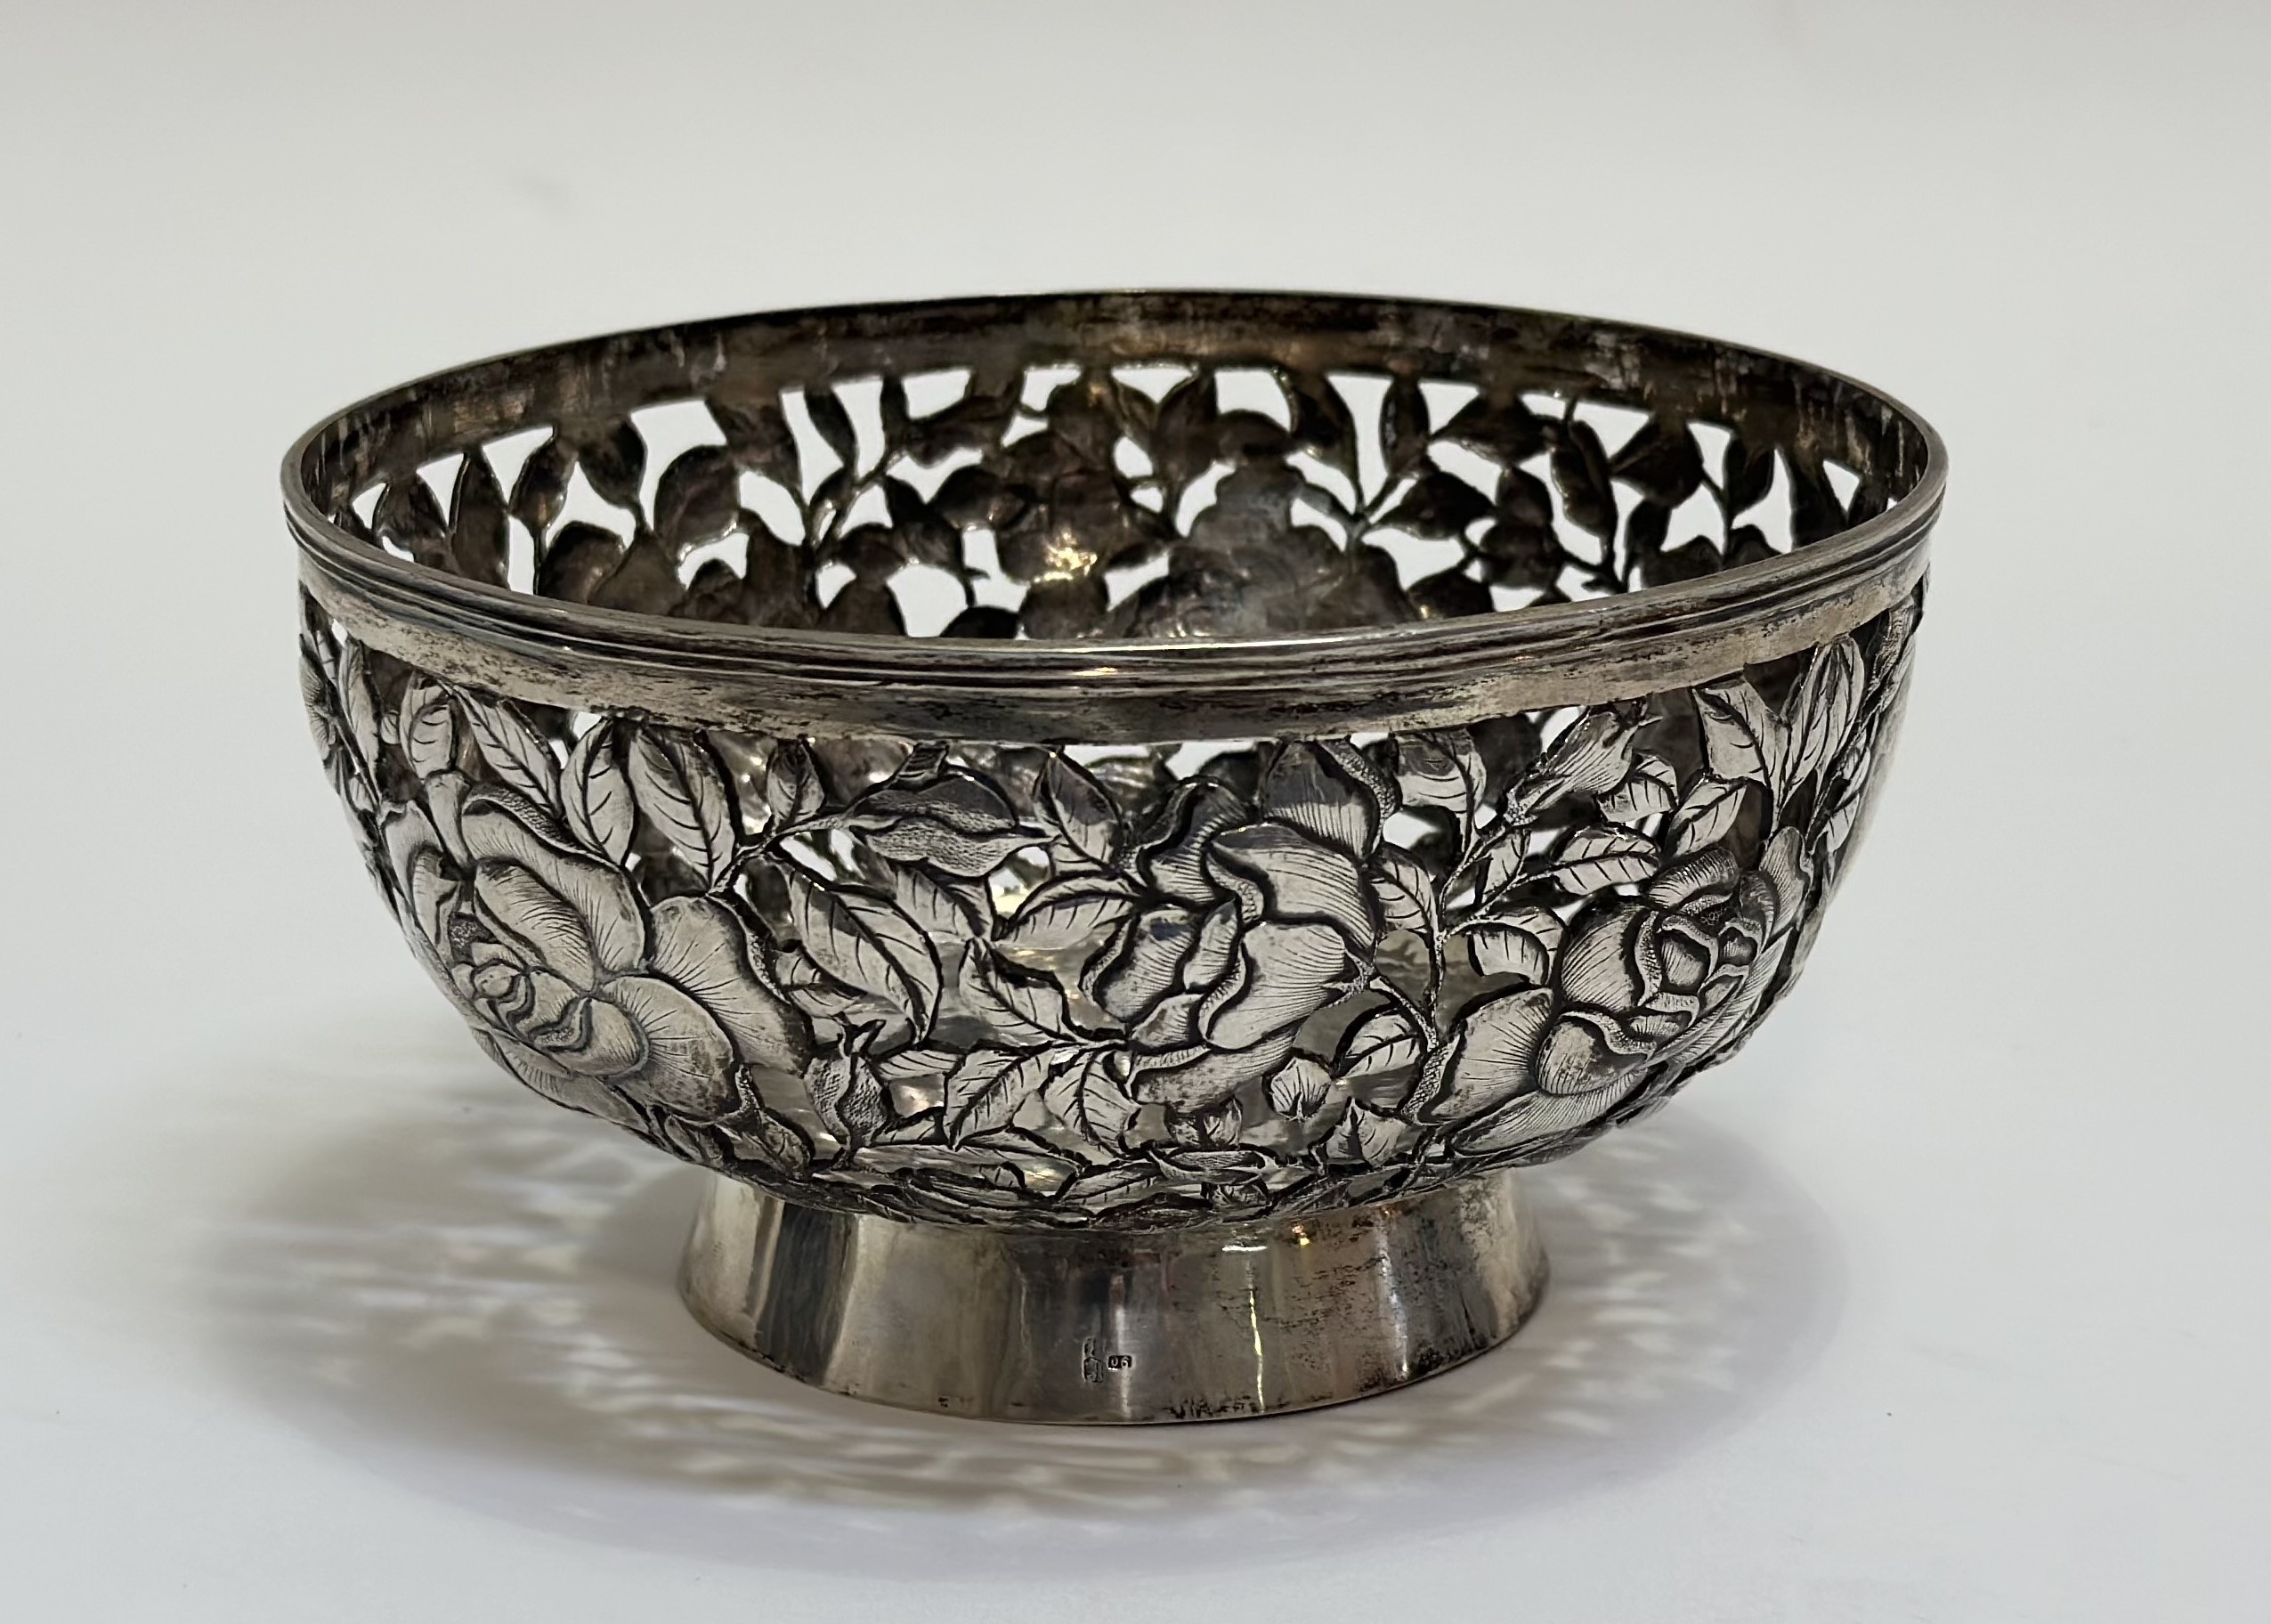 A Chinese Export silver bowl, c. 1900, in the manner of Wang Hing, pierced and chased with roses and